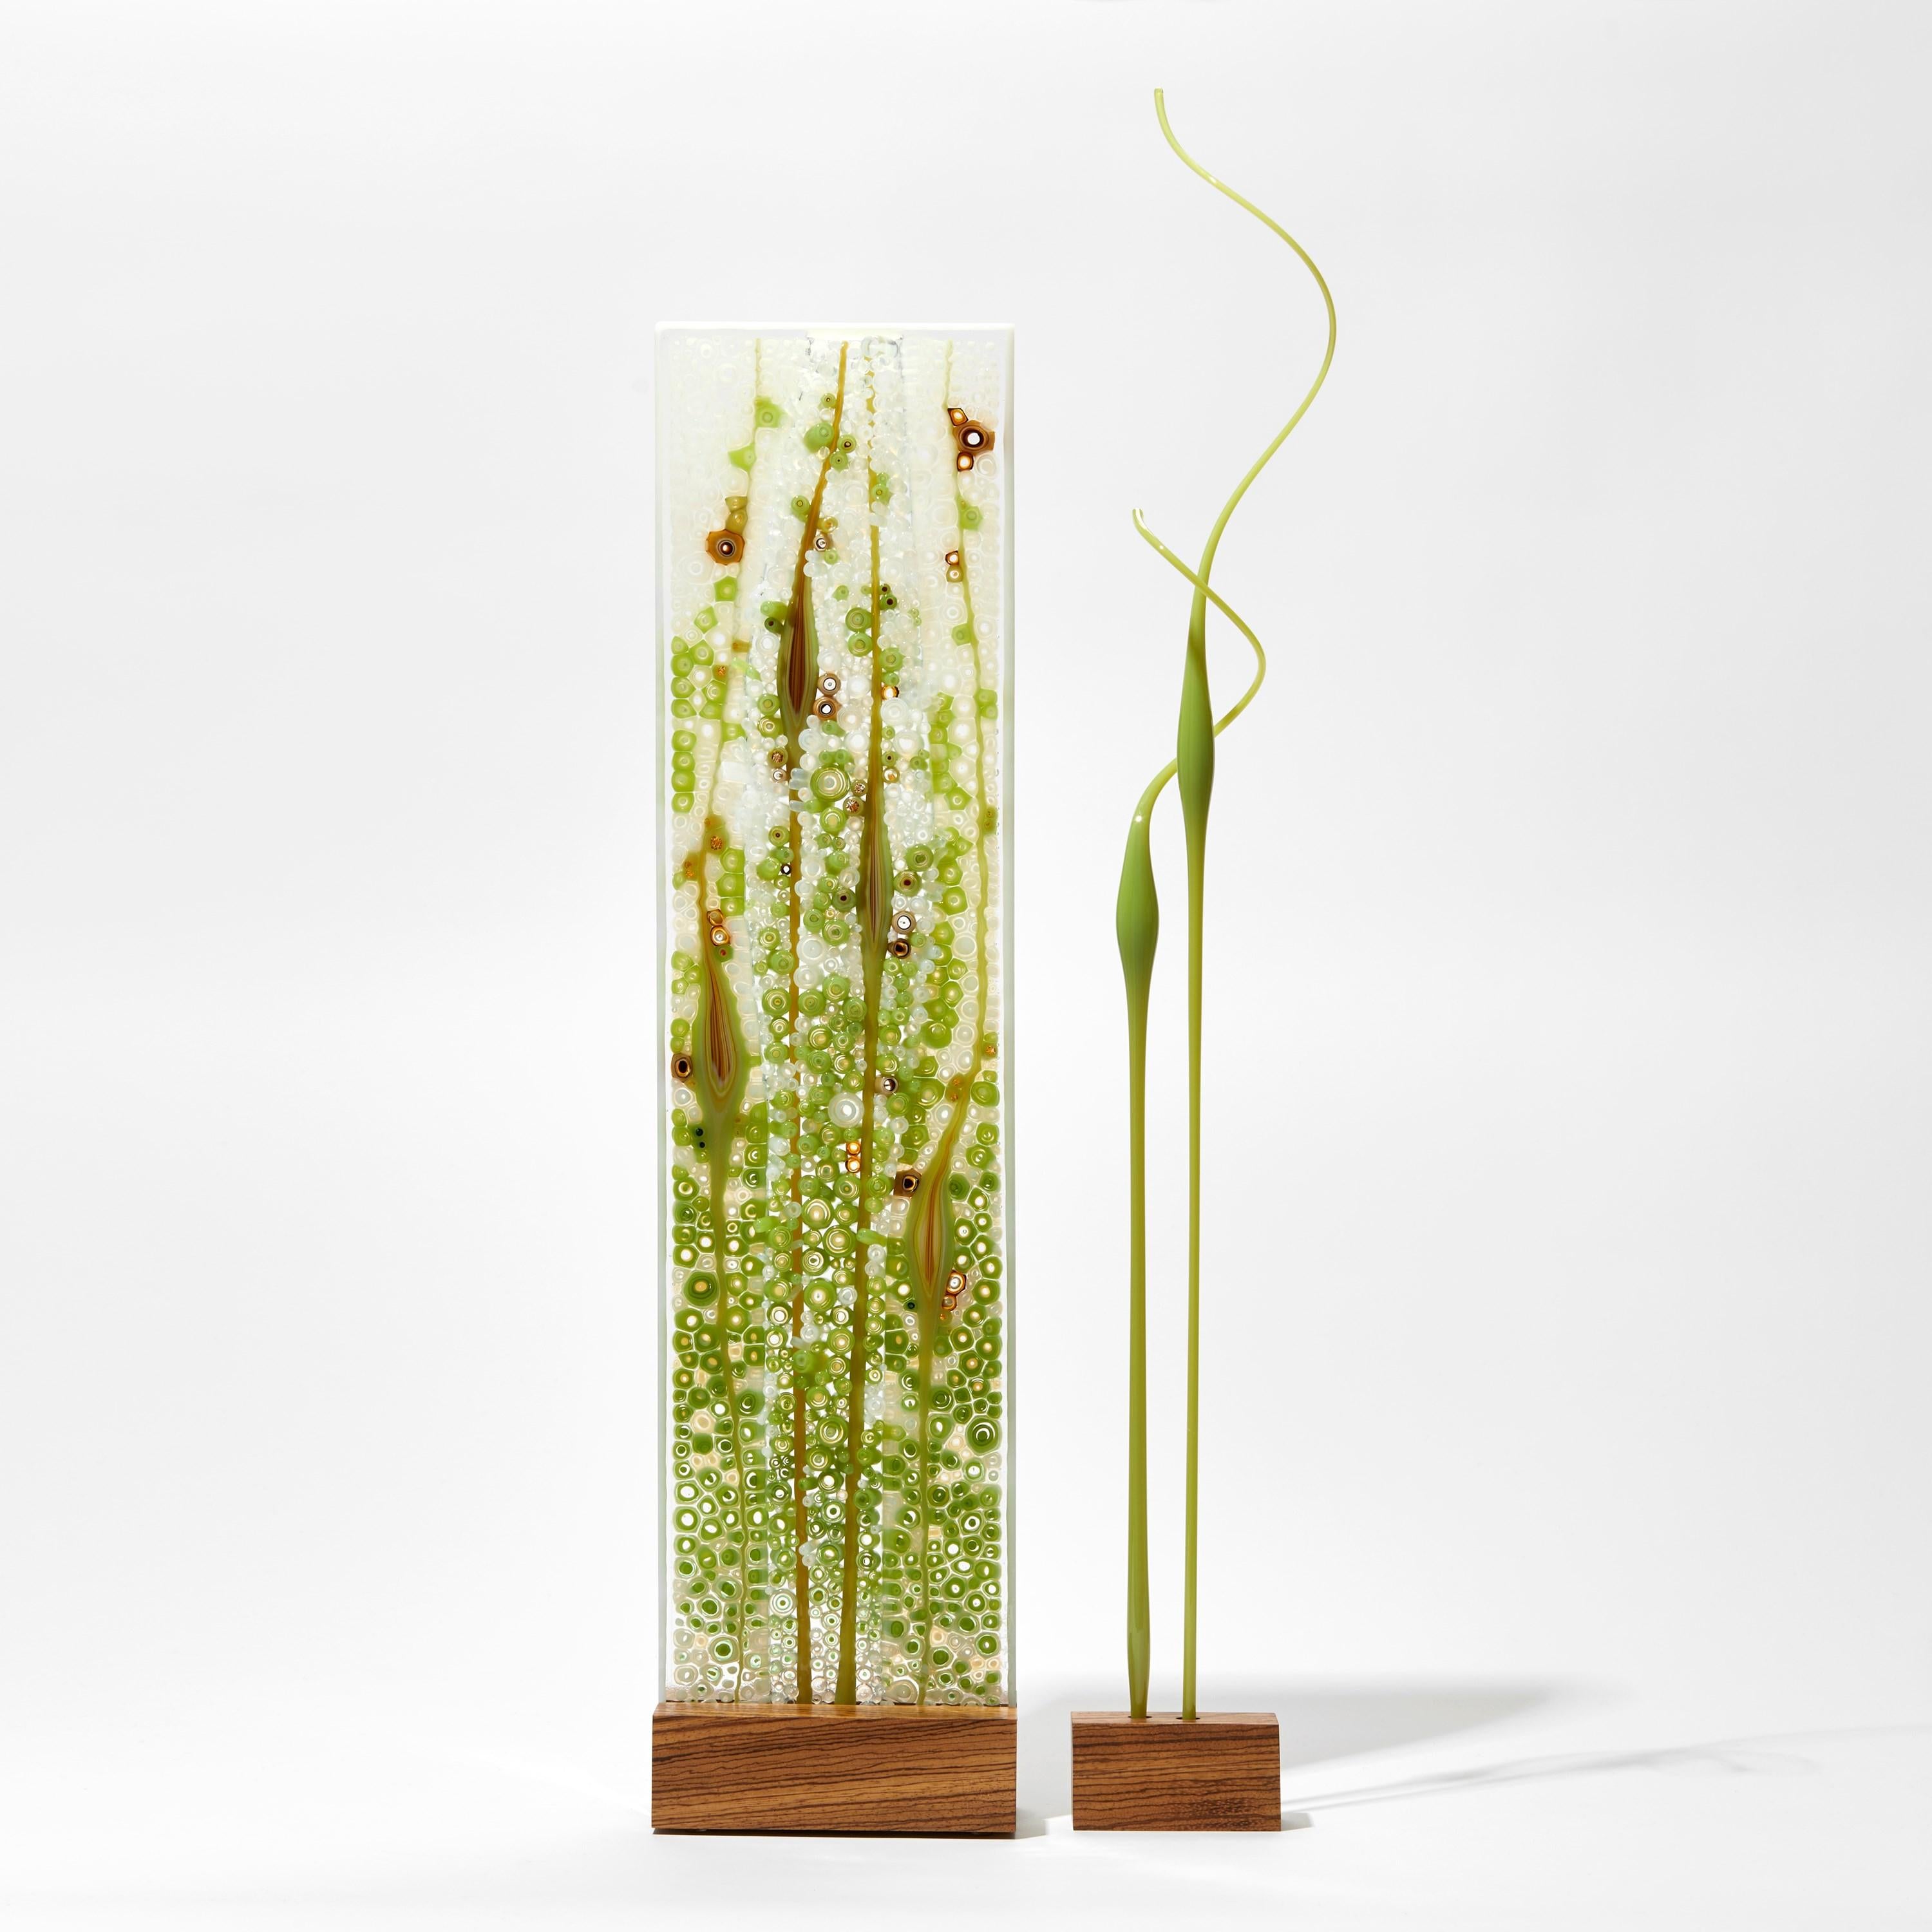 'Duality in Opal Green' is a unique glass sculpture by the Austrian artist Sandra A. Fuchs, created in verdant green, soft aqua, amber, white and clear glass.

Fuchs creates her own multicoloured and complex glass canes, which are then cut to create